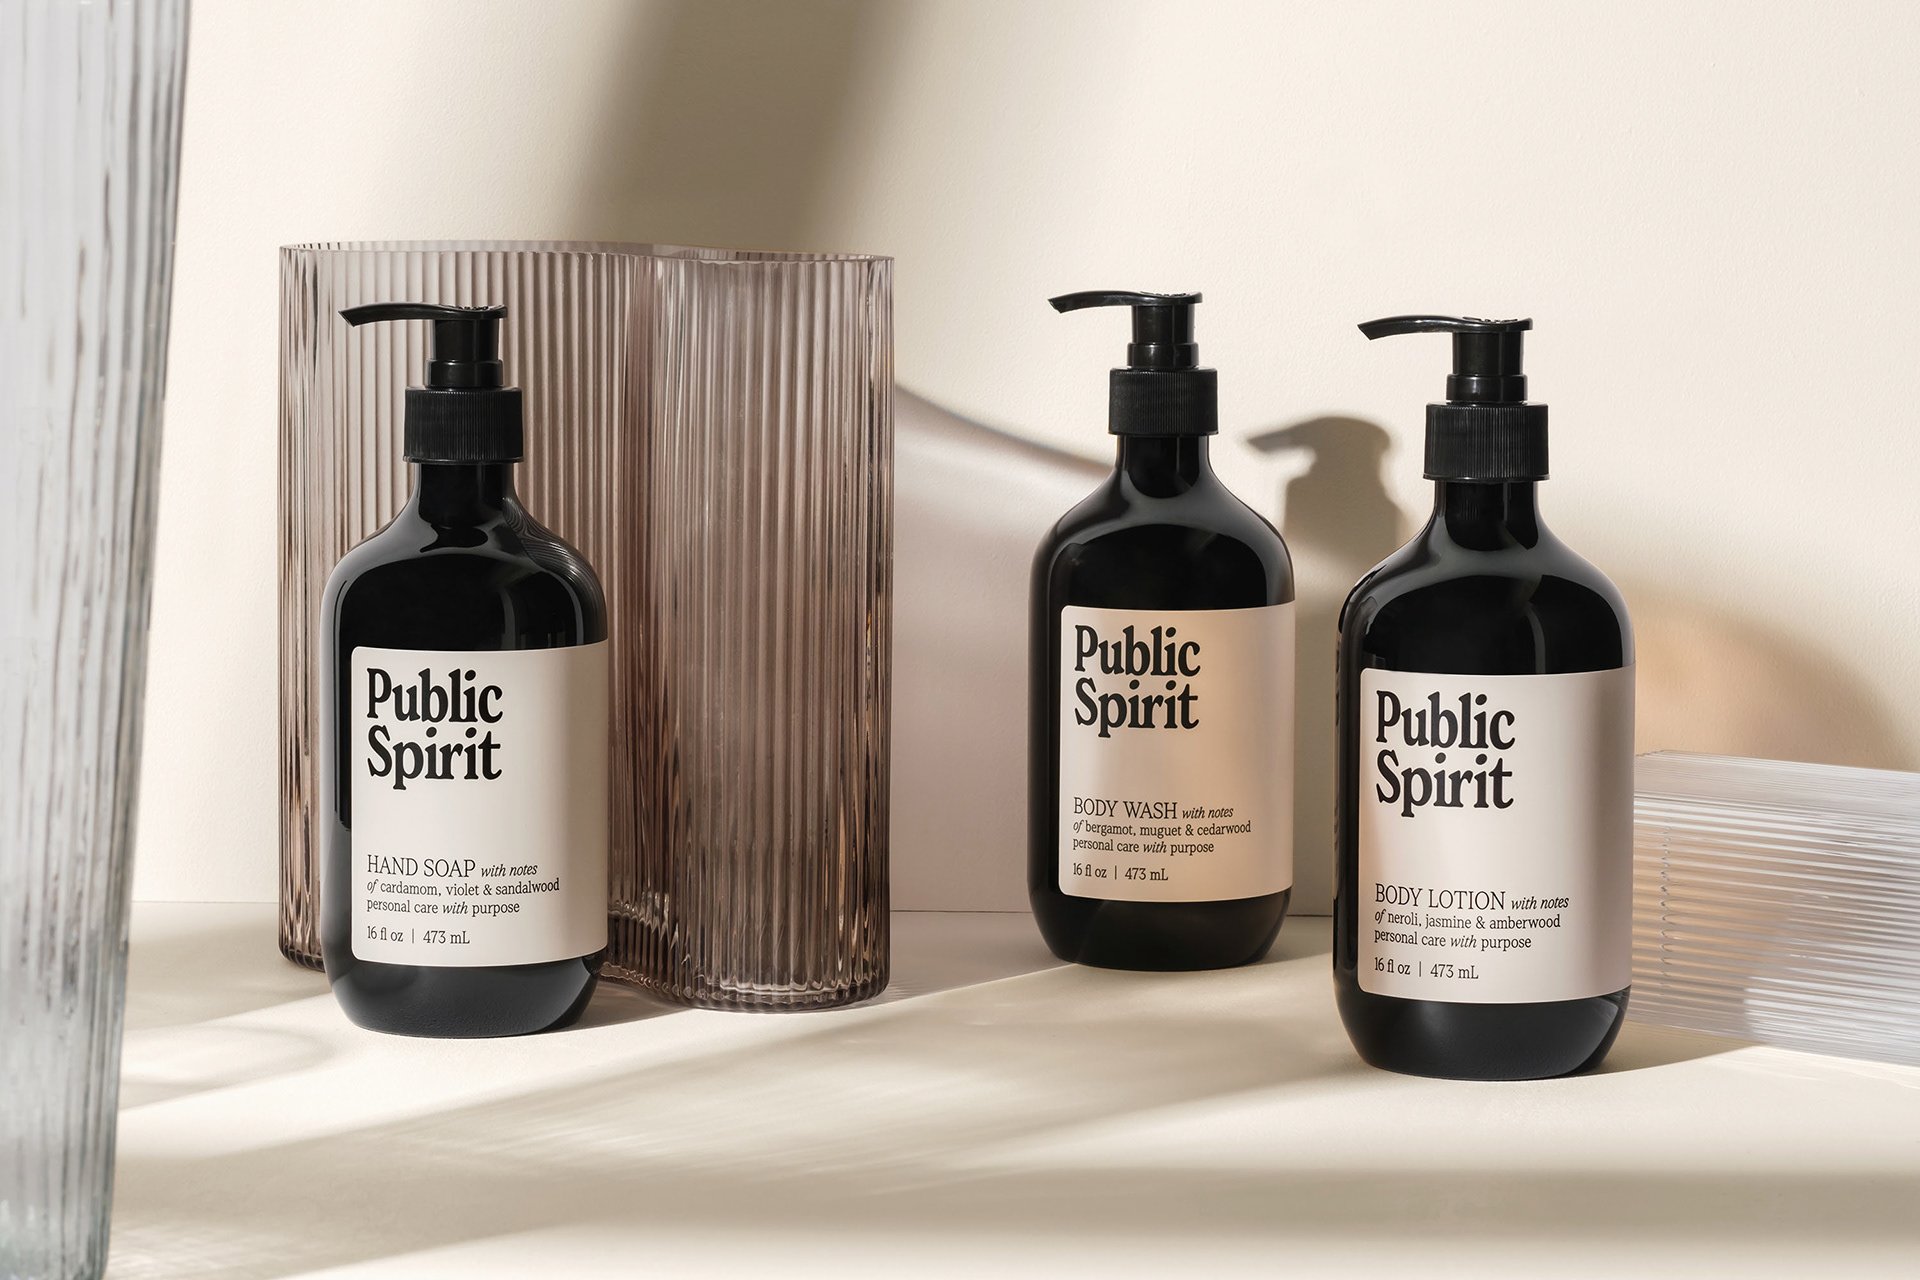 Public Spirit Makes a Case for Minimalism with Simple, Understated Packaging